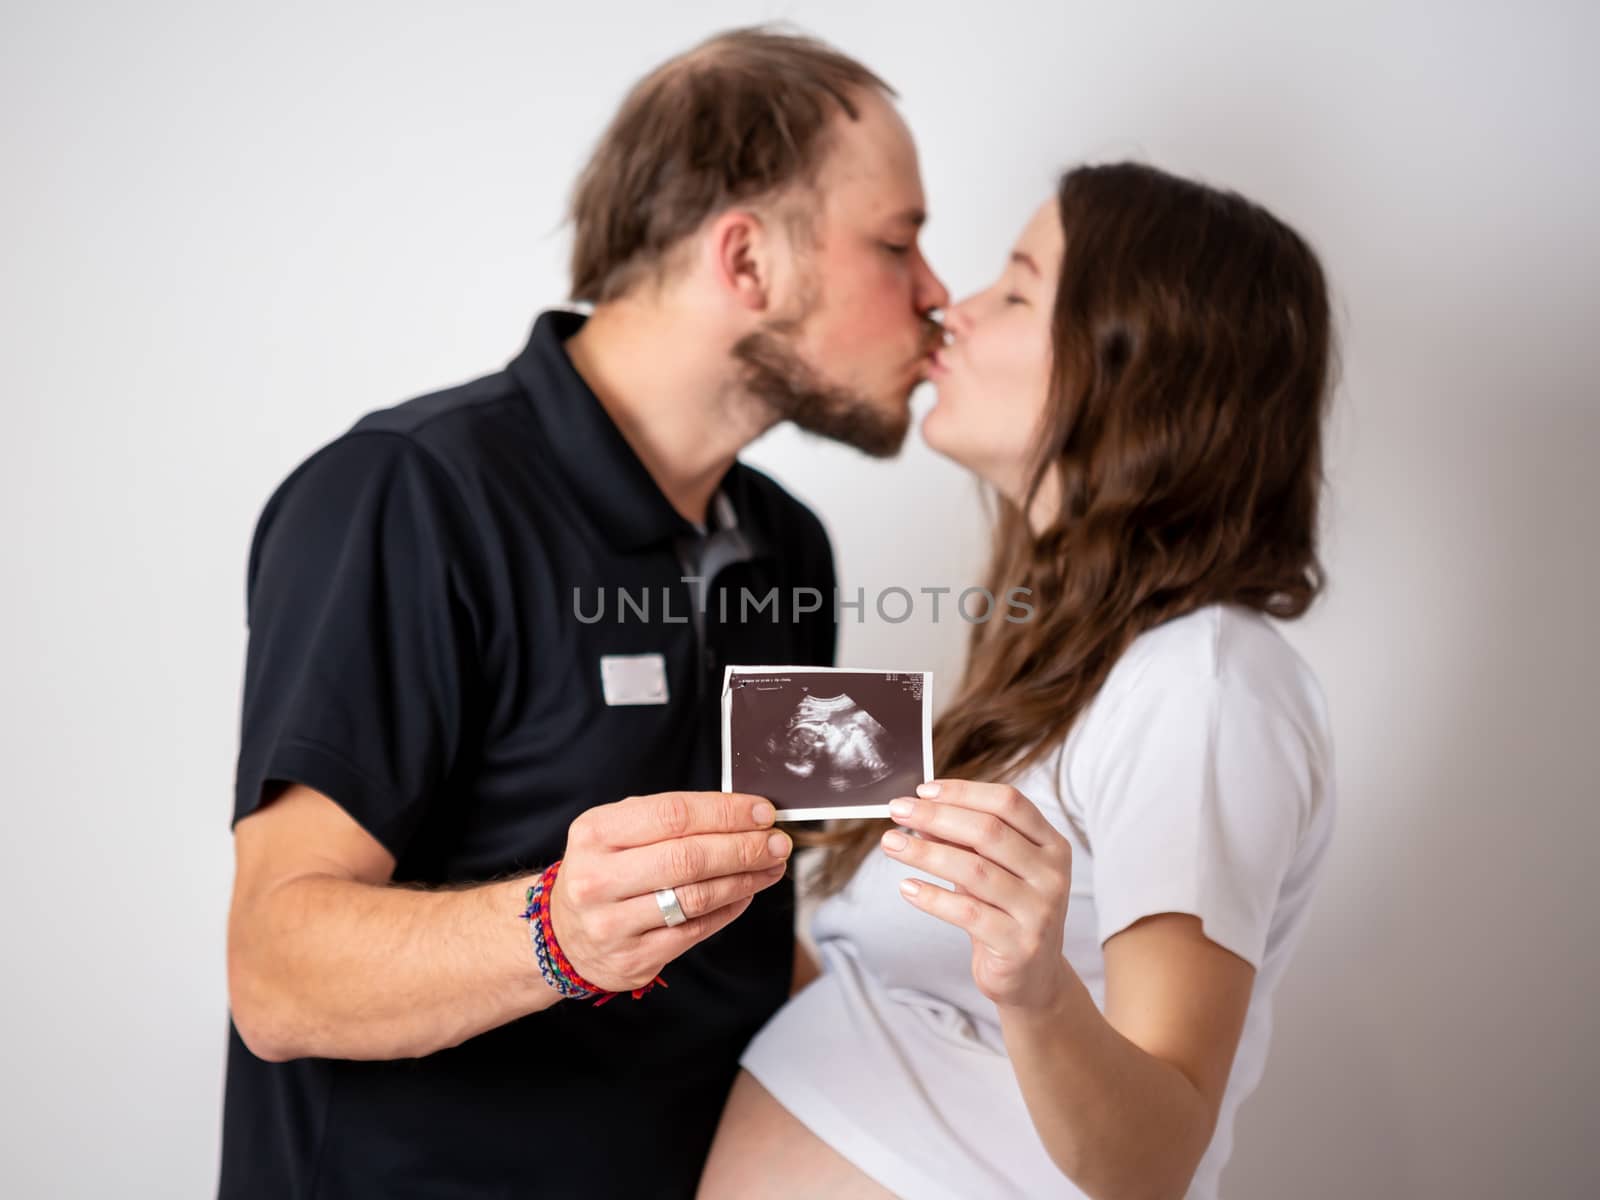 Happy married couple are showing pregnancy test stick and ultrasound picture of their unborn baby. Focus on two stripes.